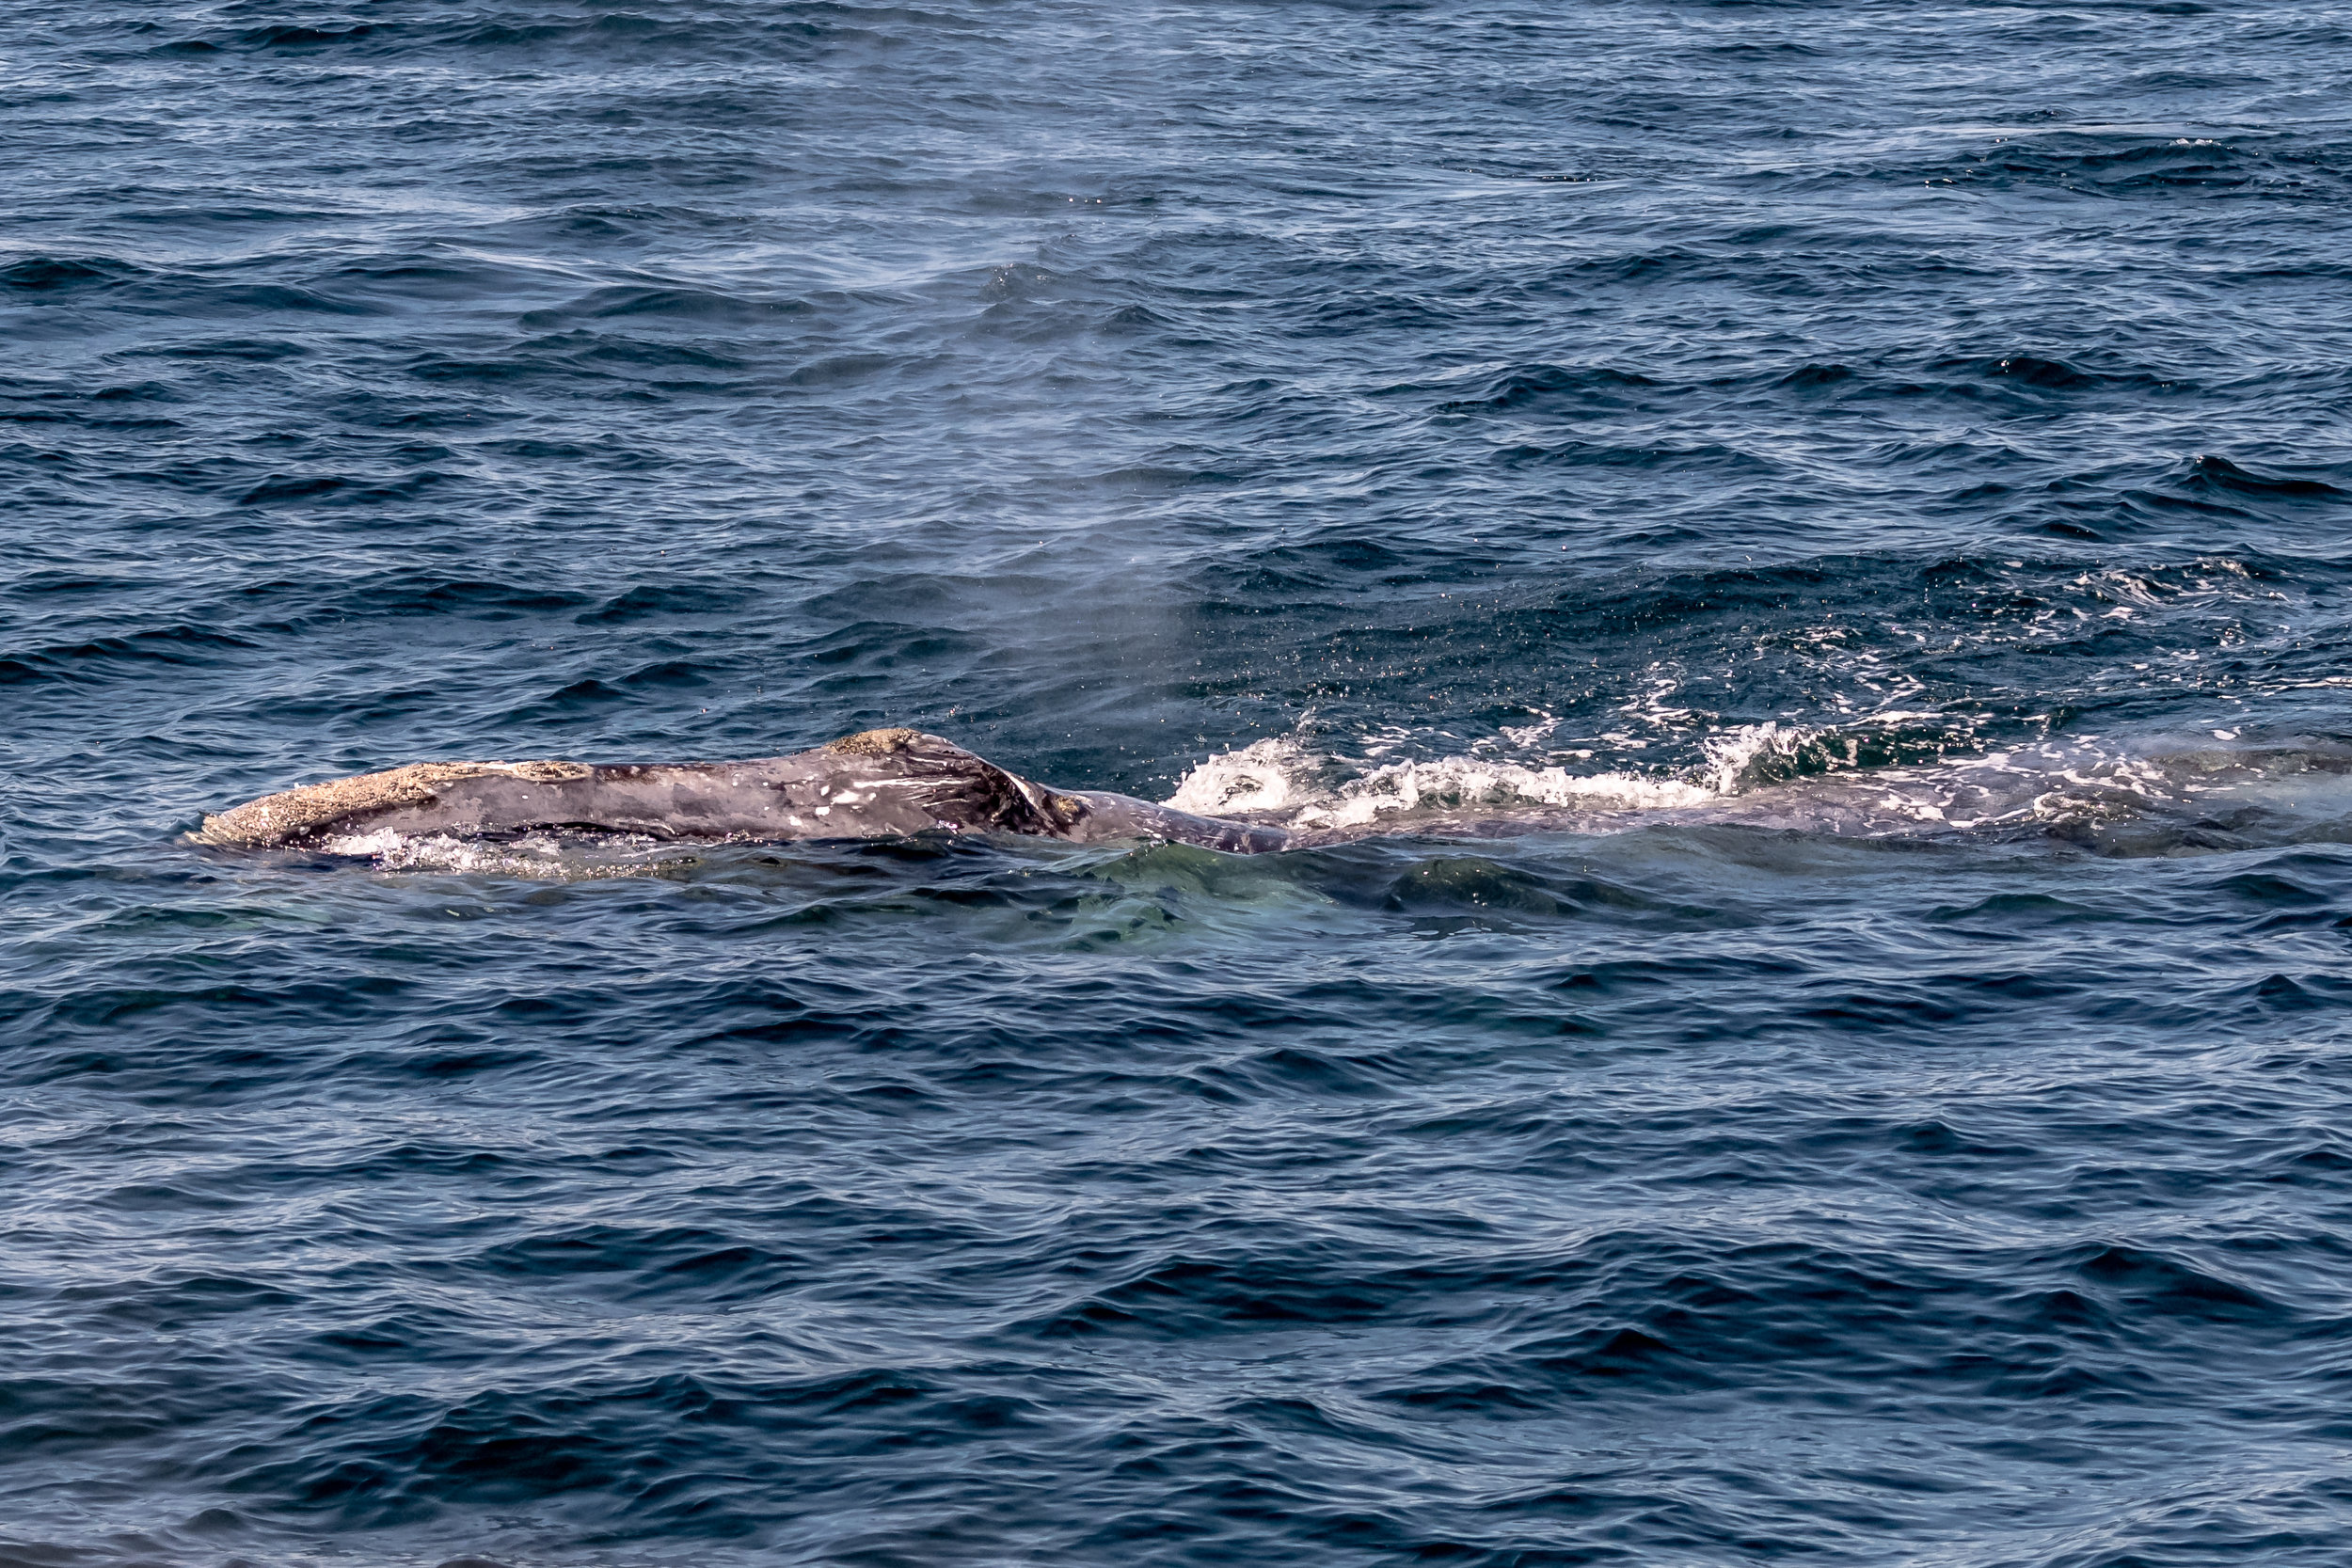   Yay !!   This is one of only 411 right whales left in the world. I took this photo last summer.  Last week a newborn calf was spotted off go the coast of Georgia …the first calf in 2 years discovered…so I say YAY !!  